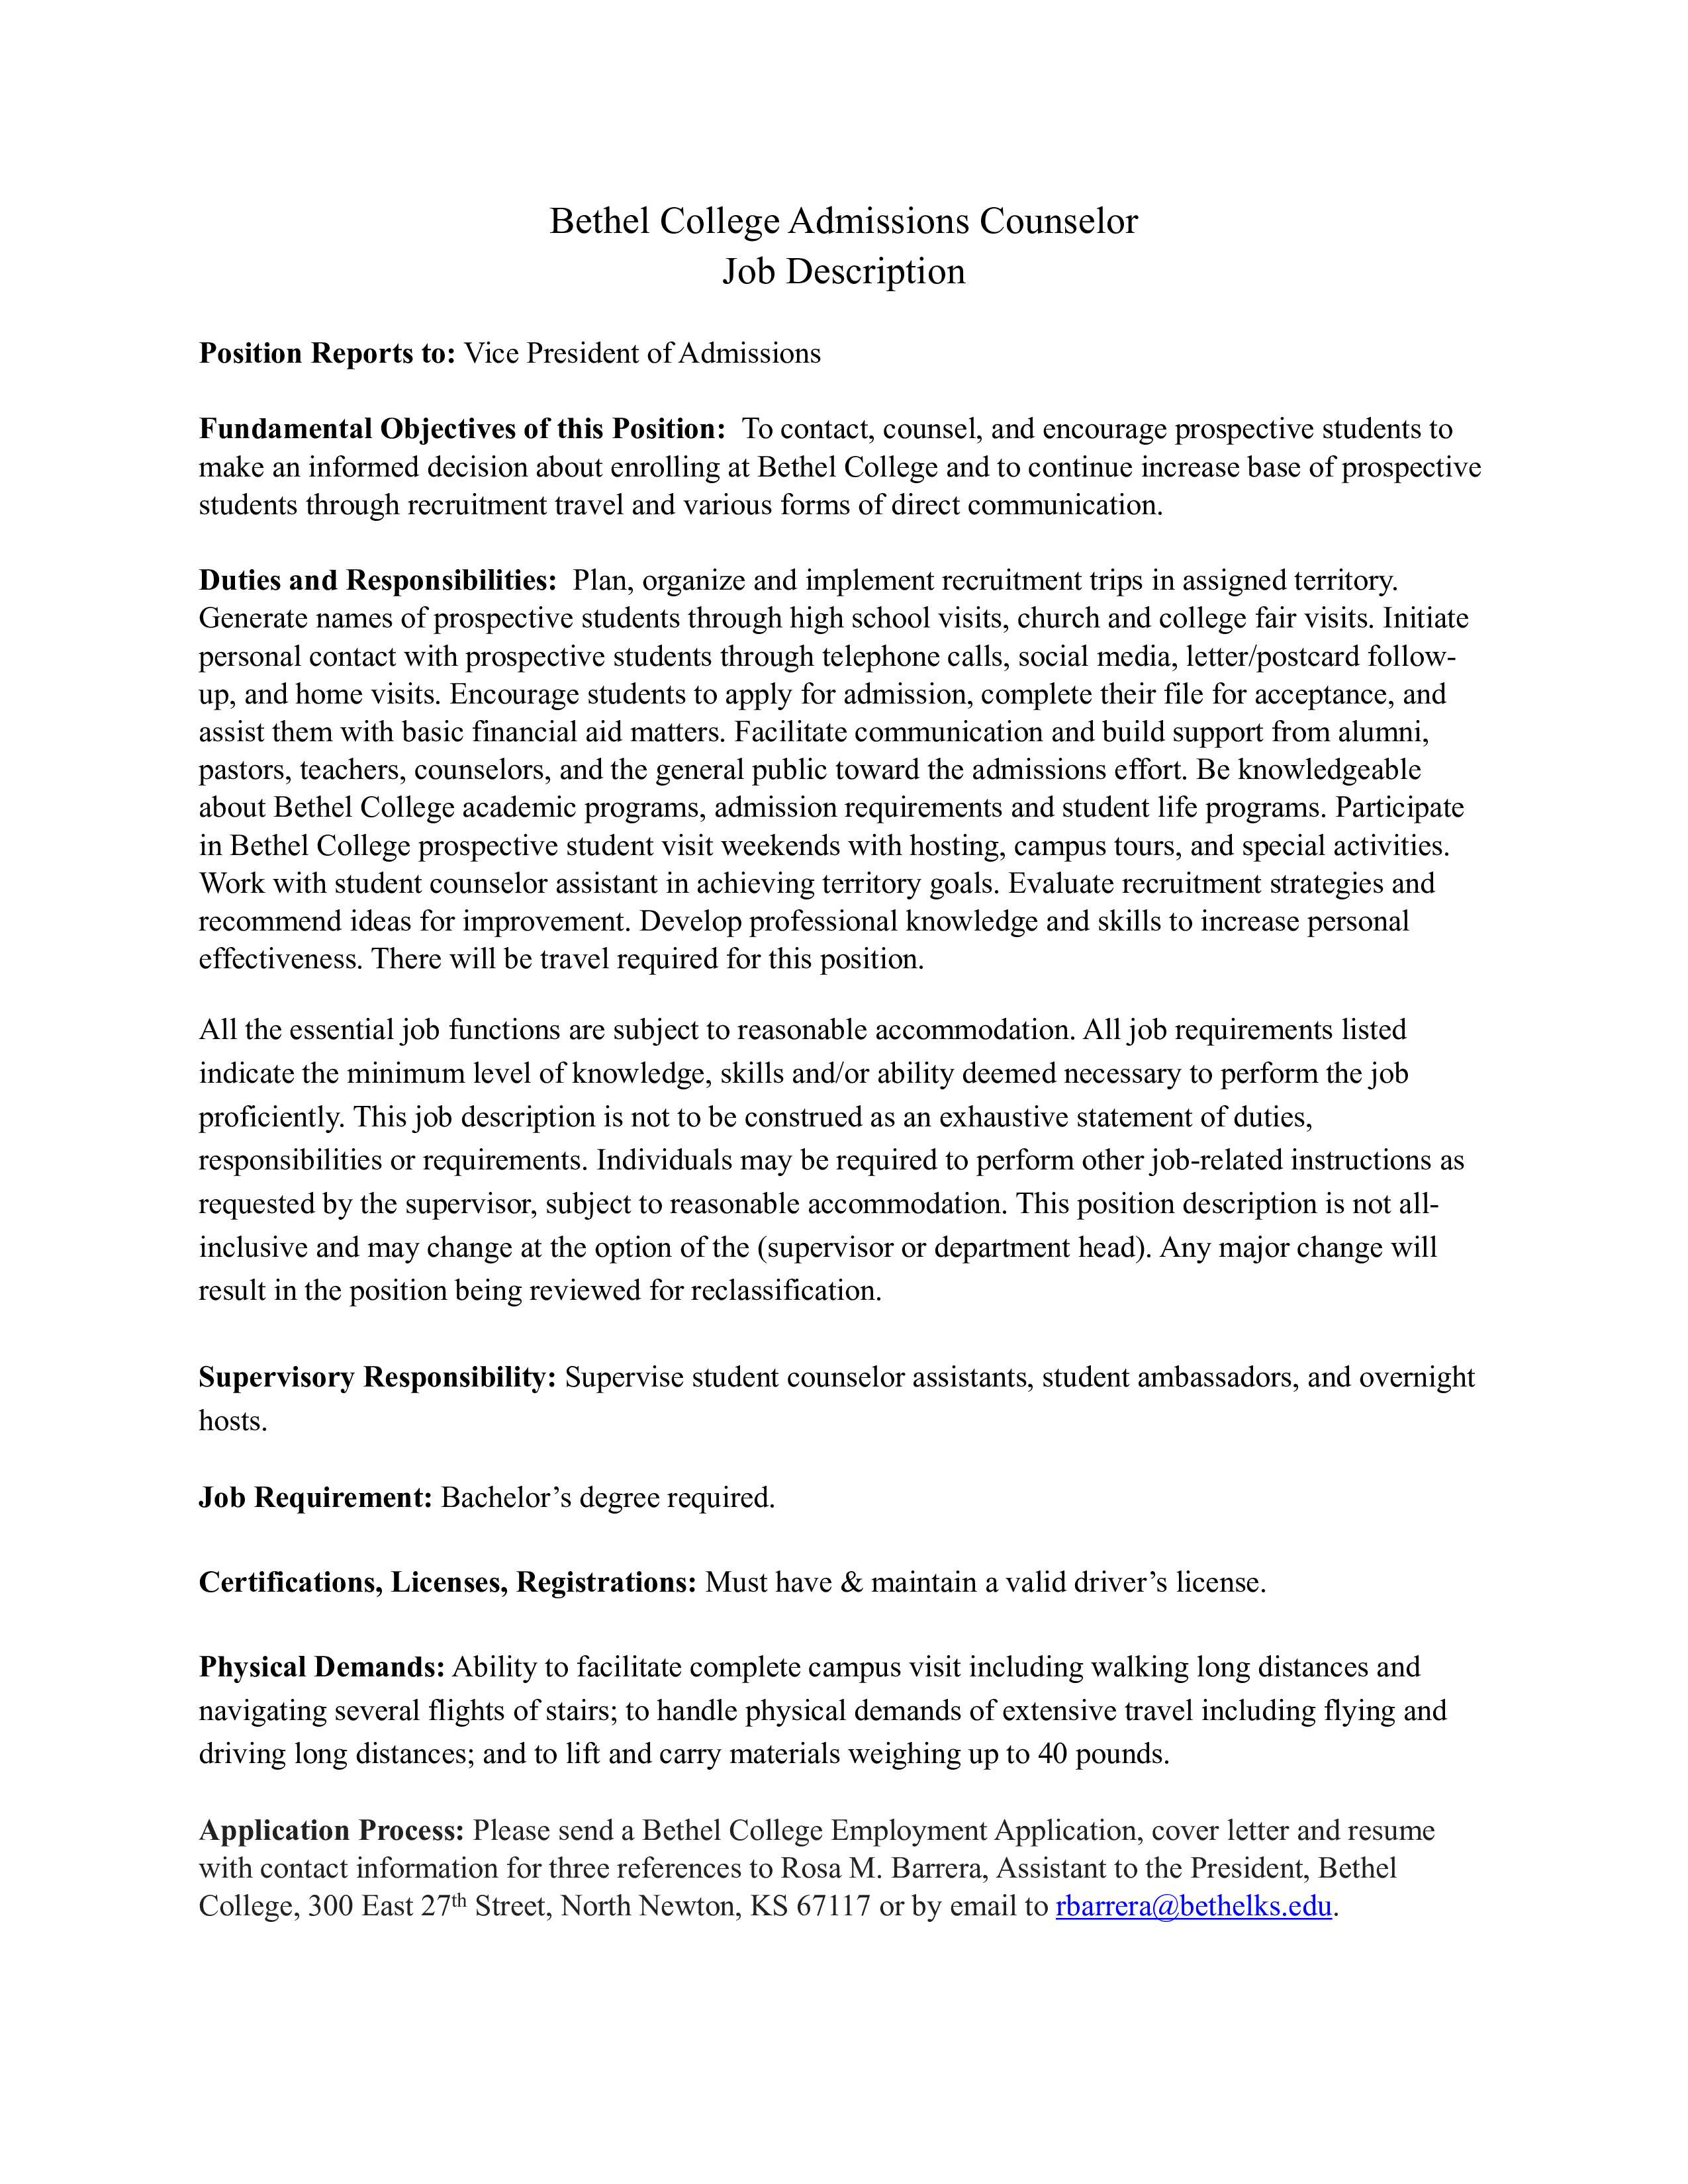 Cover Letter For Admissions Counselor from www.allbusinesstemplates.com